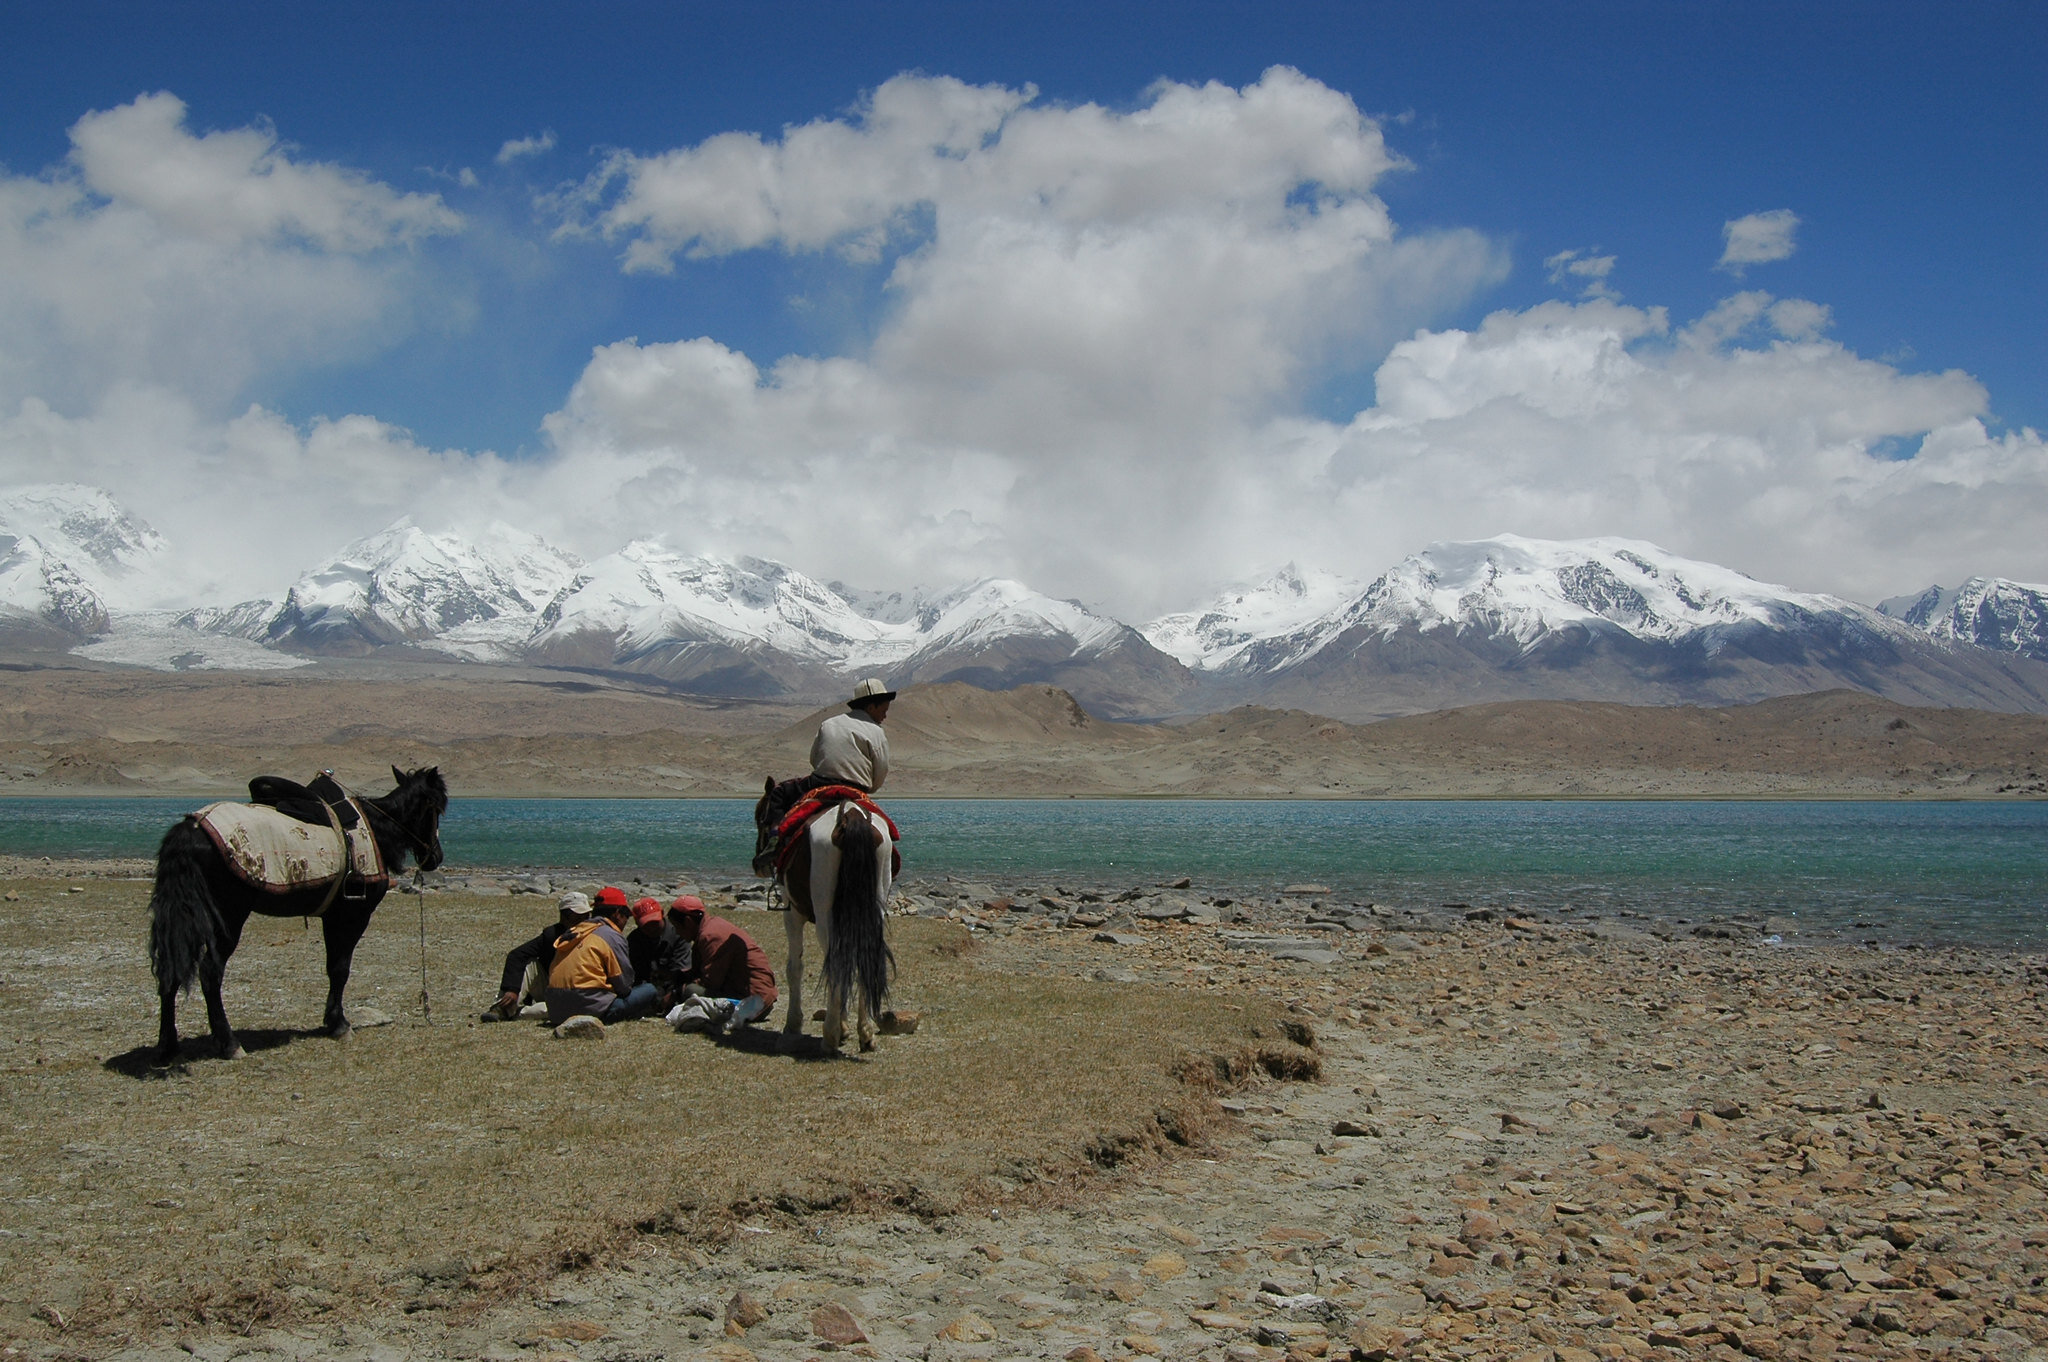 PICTURED: A group of Uighurs take a break from traveling across the vastness. Photo credit Richard Weil. CC. 2.0.